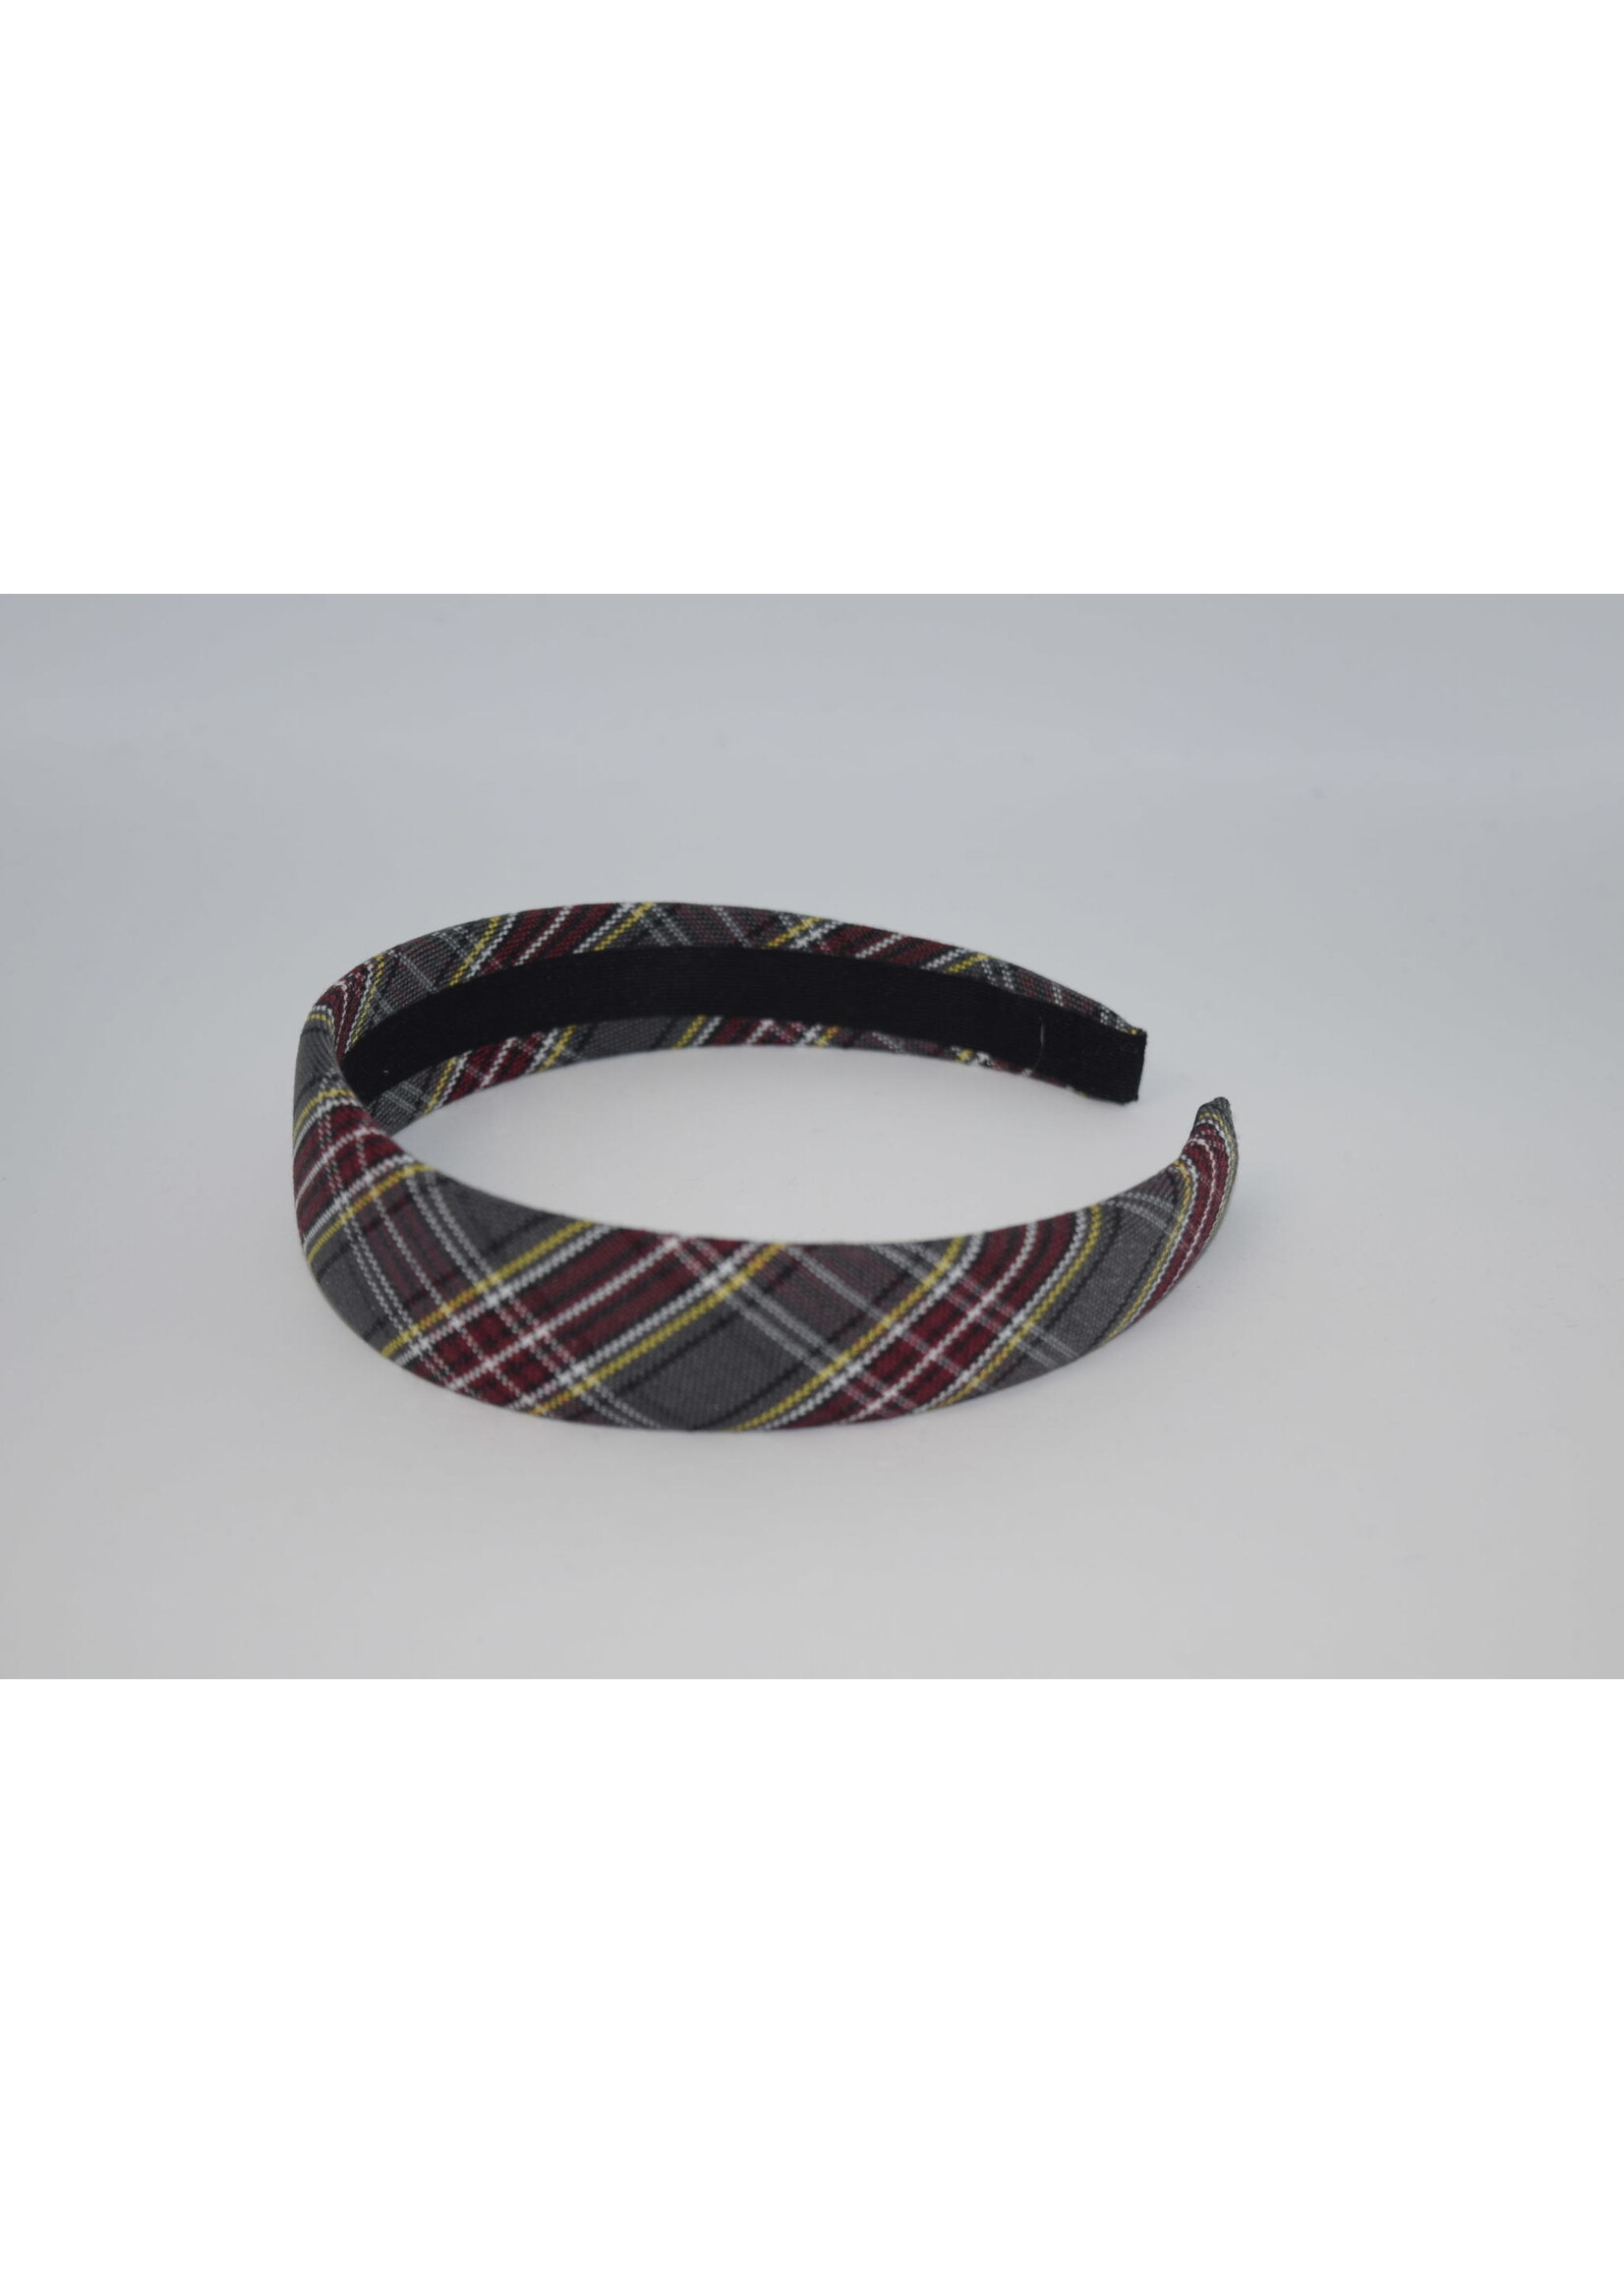 Wide padded headband w/out metal tips P43